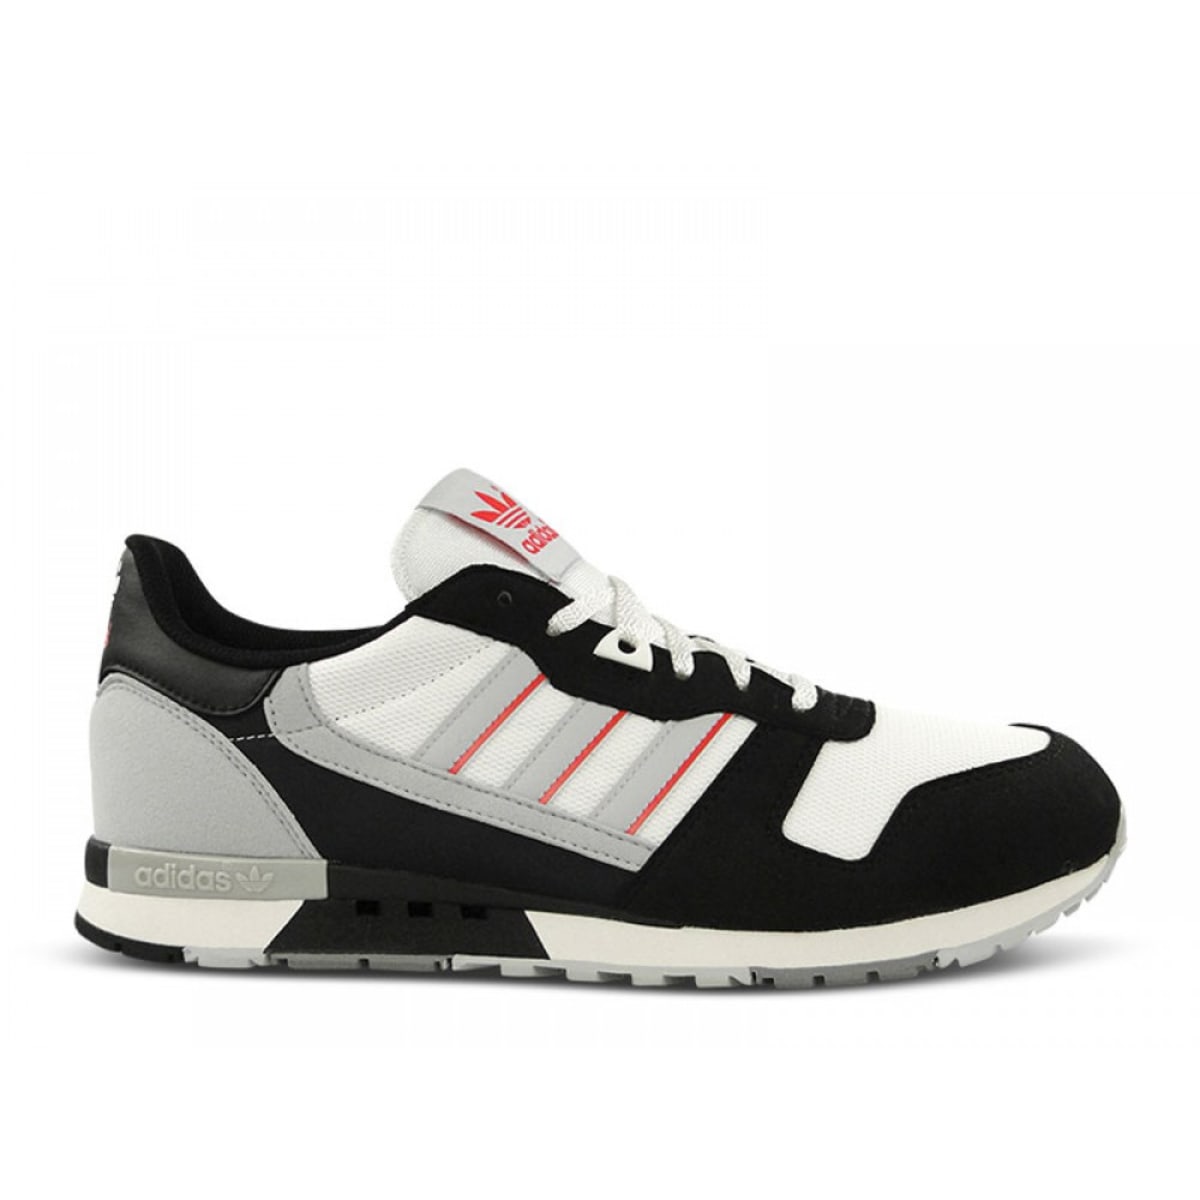 adidas ZX 550 | Adidas | Sneaker News, Launches, Release Dates 